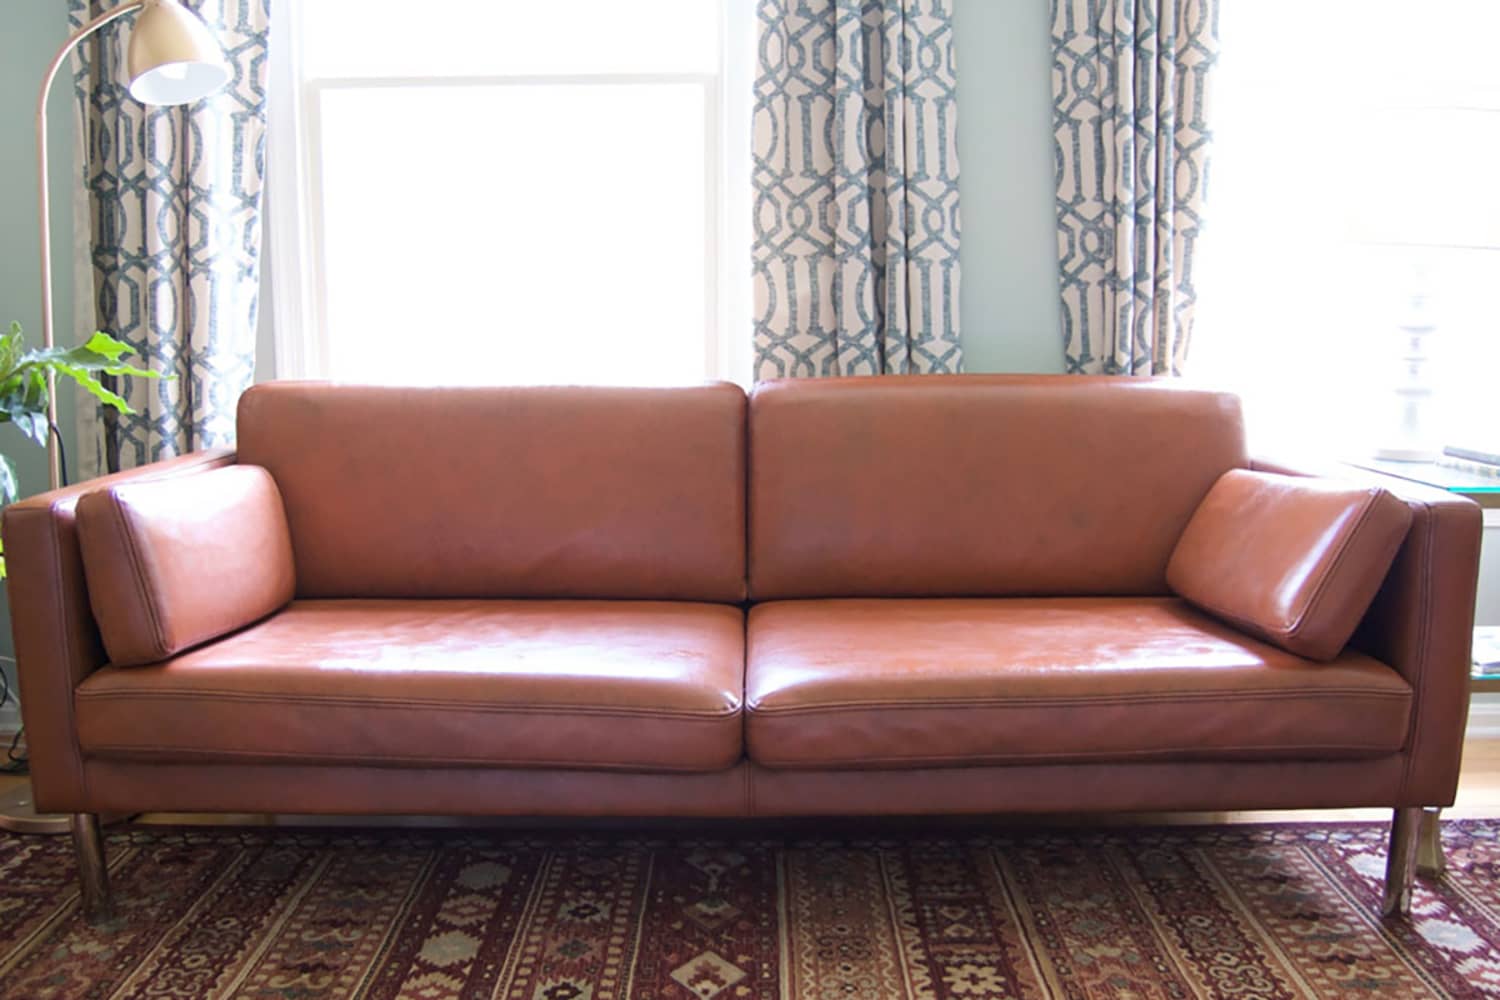 can spray paint use on fading leather sofa